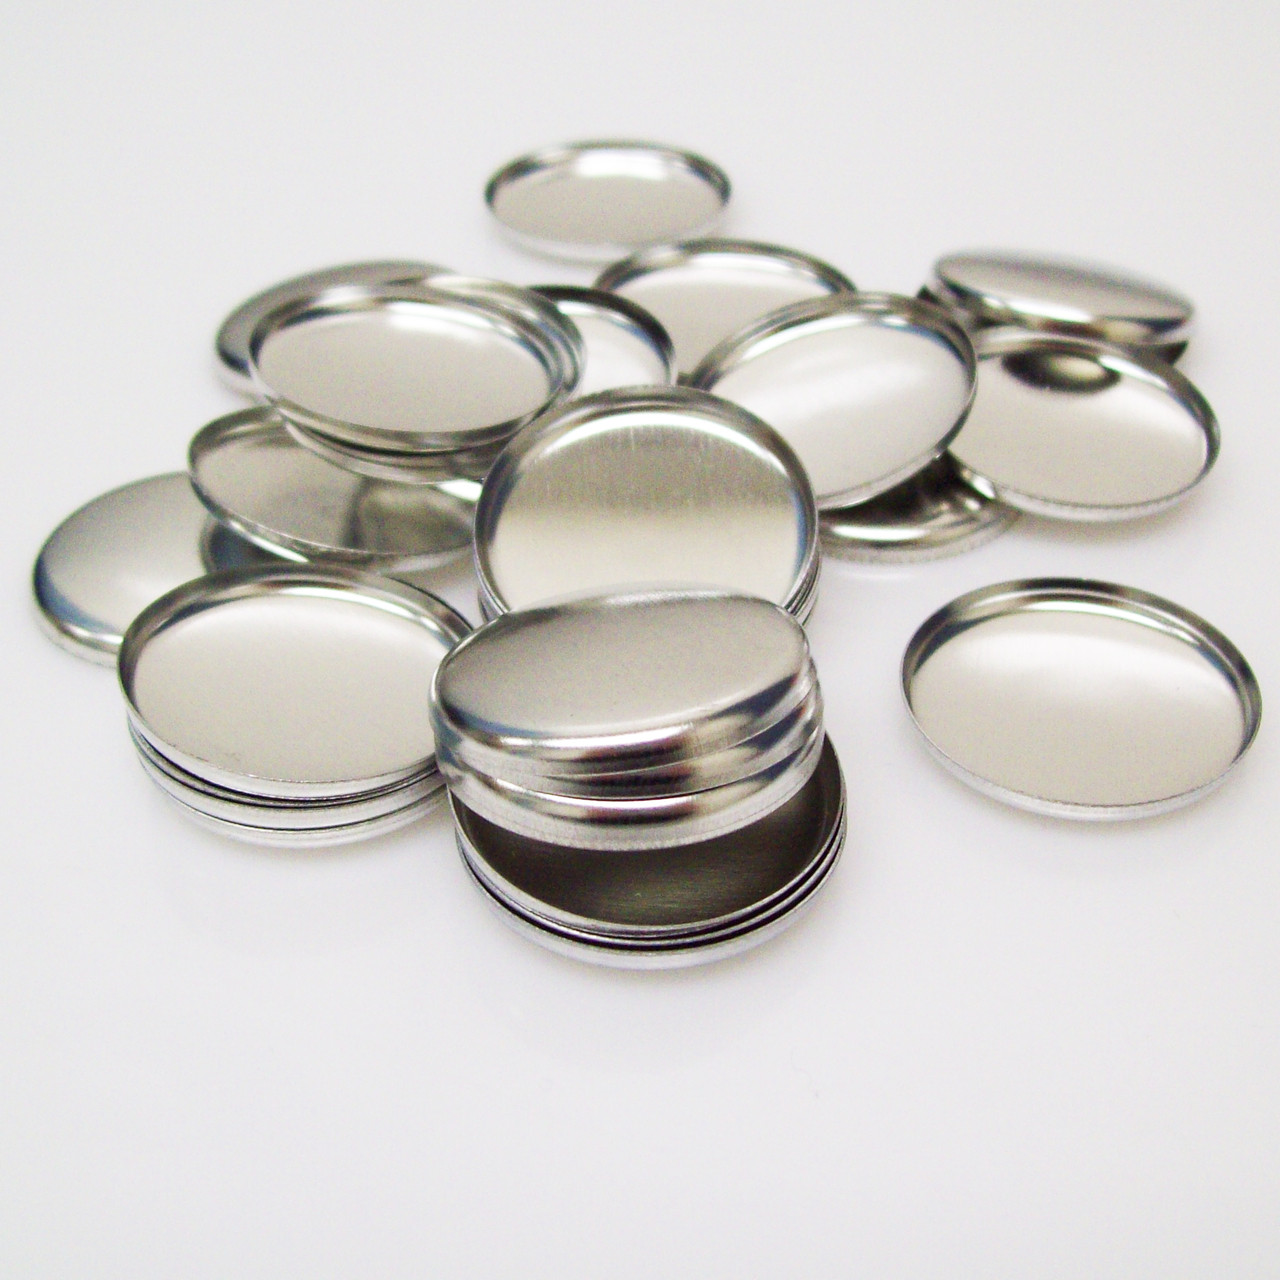 Shells ONLY for 1 Inch ( 1 ) Tecre Buttons - 1000 pcs - Button Boy